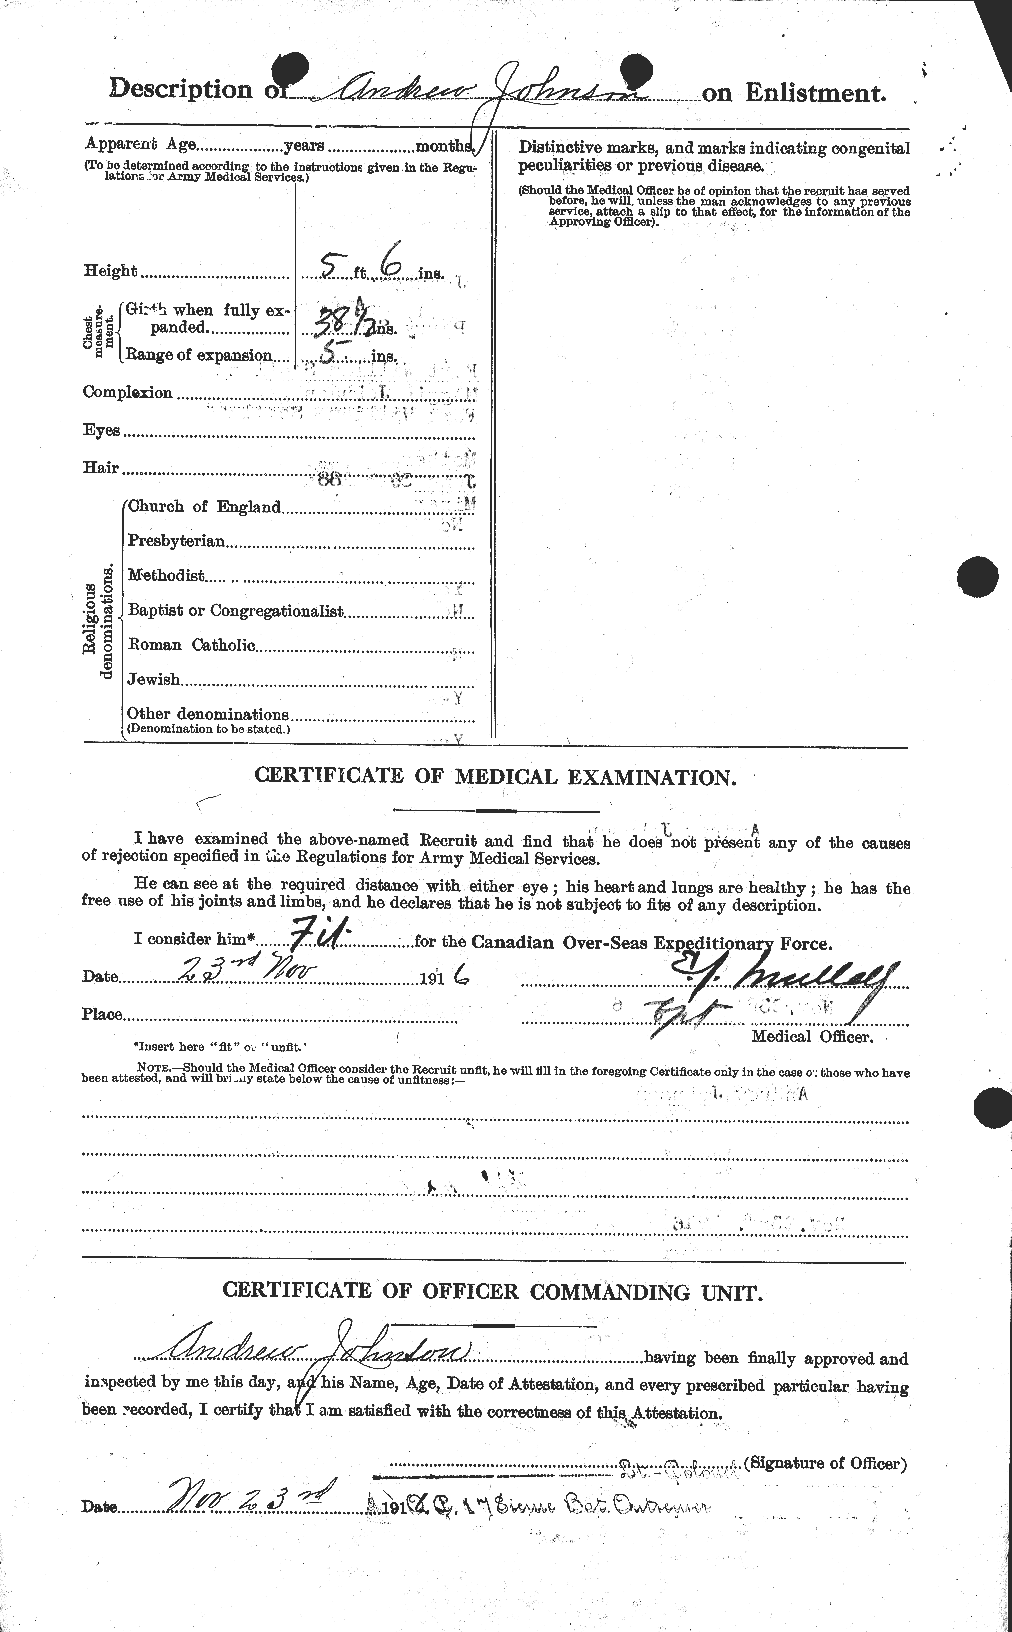 Personnel Records of the First World War - CEF 421206b